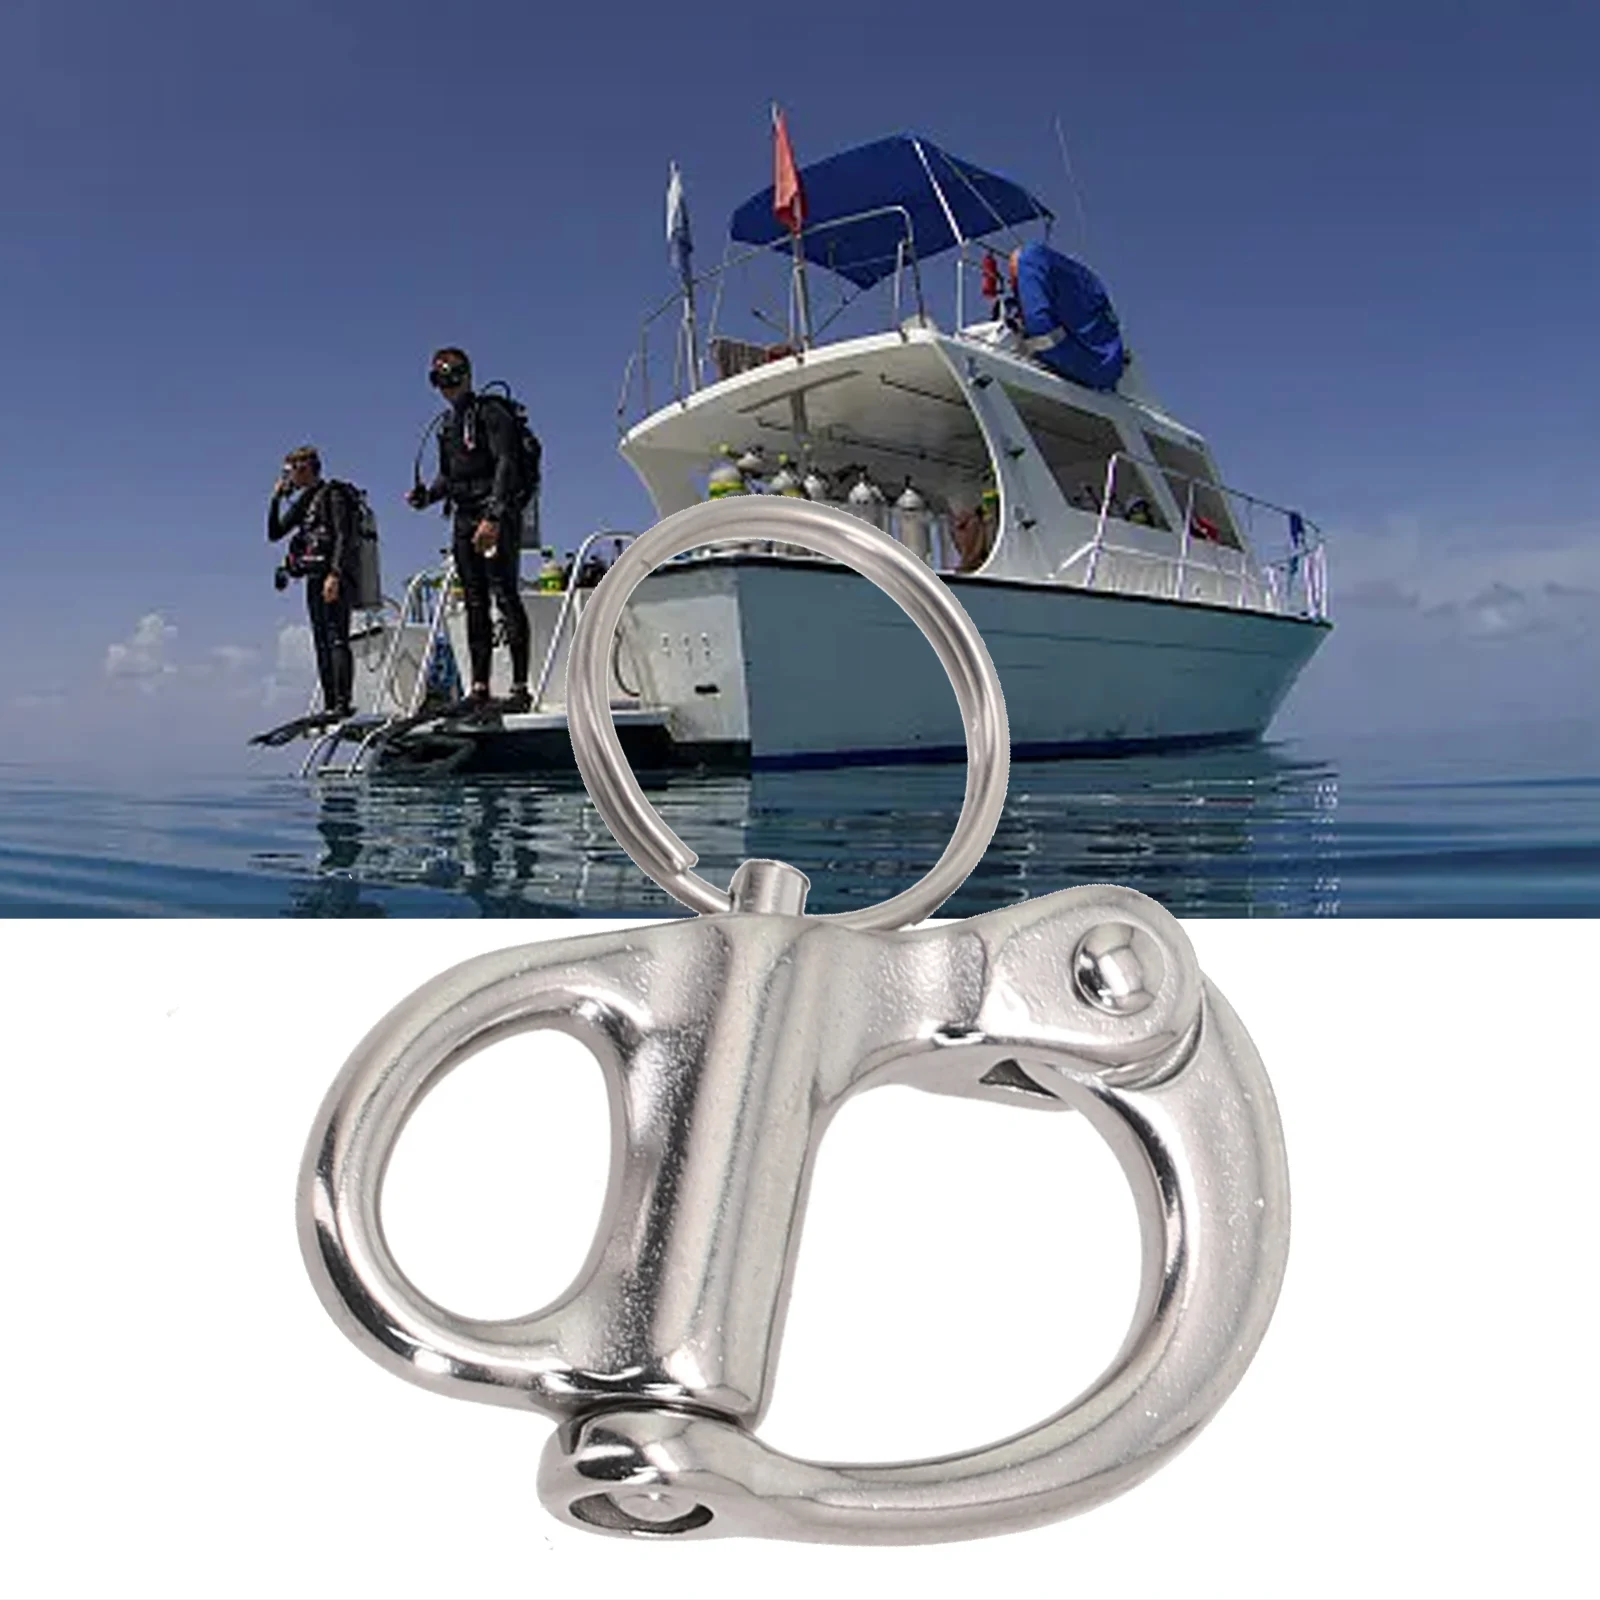 1PCS 35/52/69/96MM Quick Release Boat Anchor Chain Eye Shackle Swivel Hook Snap Marine Tools 316/304 Stainless Steel Accessory 30pcs 13 16 20mm metal buckles dog collar lobster clasp handbag strap swivel trigger clip snap hook diy craft accessory